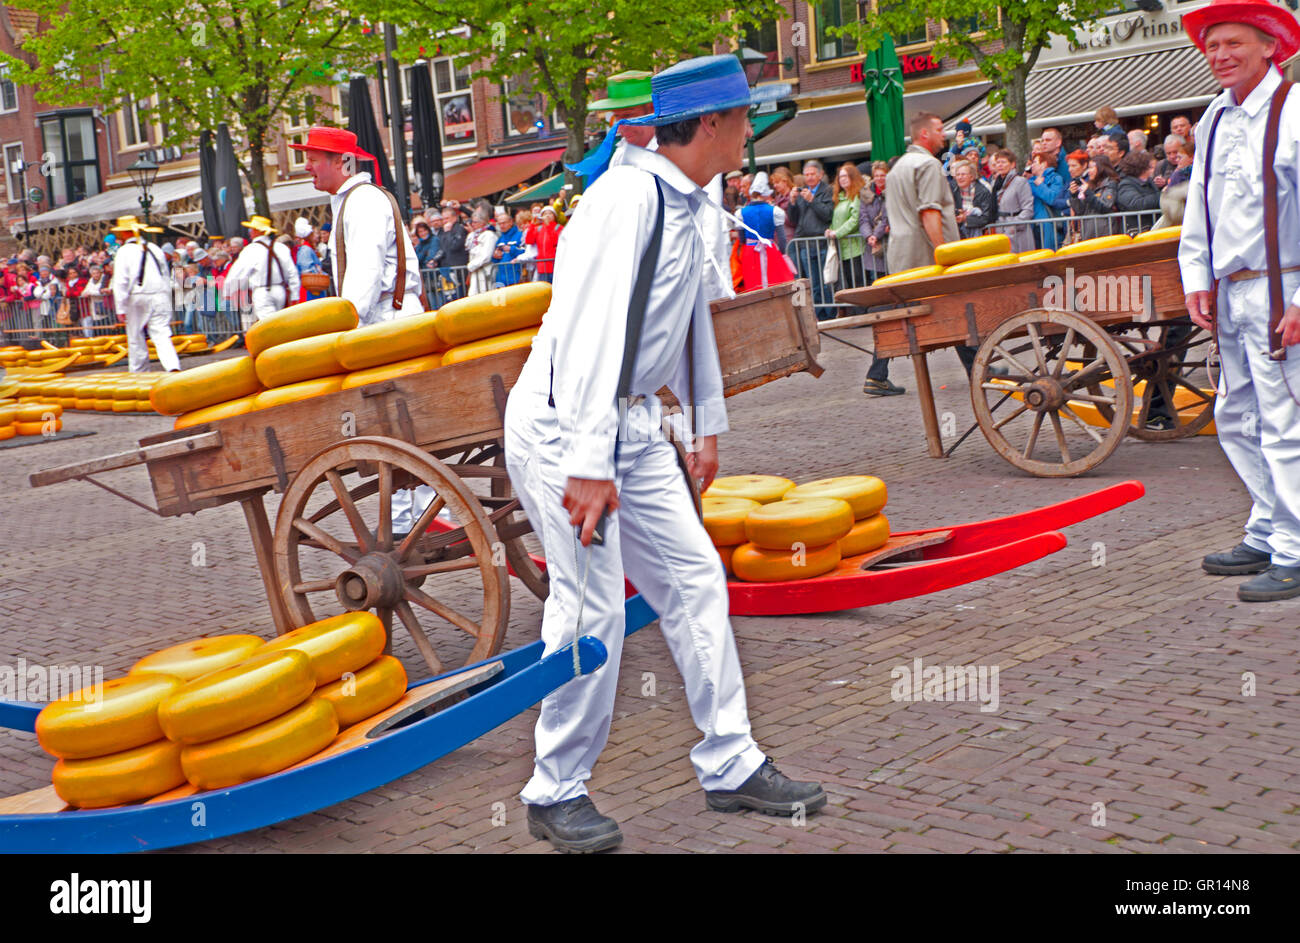 Cheese carriers transport the heavy cheeses on wooden sledges called 'Berries' at the Alkmaar Cheese Market, Holland Stock Photo